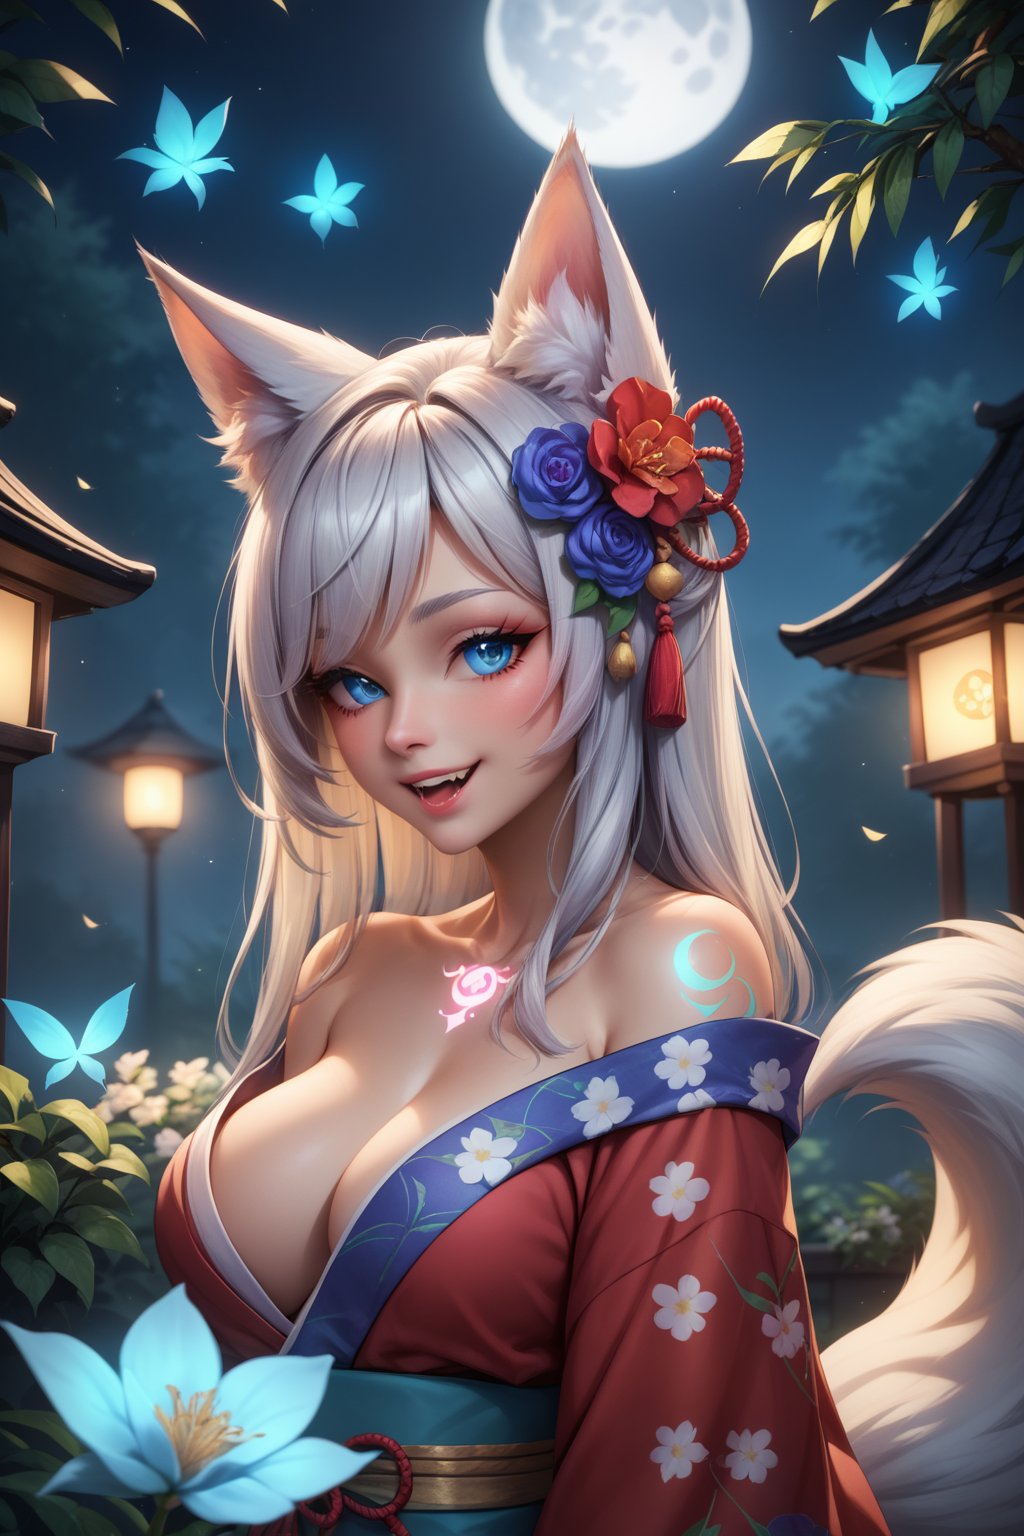 score_9, score_8_up, score_7_up,  score_9, score_8_up, score_7_up,   kitsune girl, floral kimono, exposed shoulders, beautiful face, thick eyelashes, glowing white eyes, fox ears, long flowy silver hair, cute smile, dark eyeshadow, glowing shoulders tattoos, glowing back tattoos, floral decoration in hair, night time, shinning moon, lit by moonlight, ambient lighting, fangs, long fluffy tail   